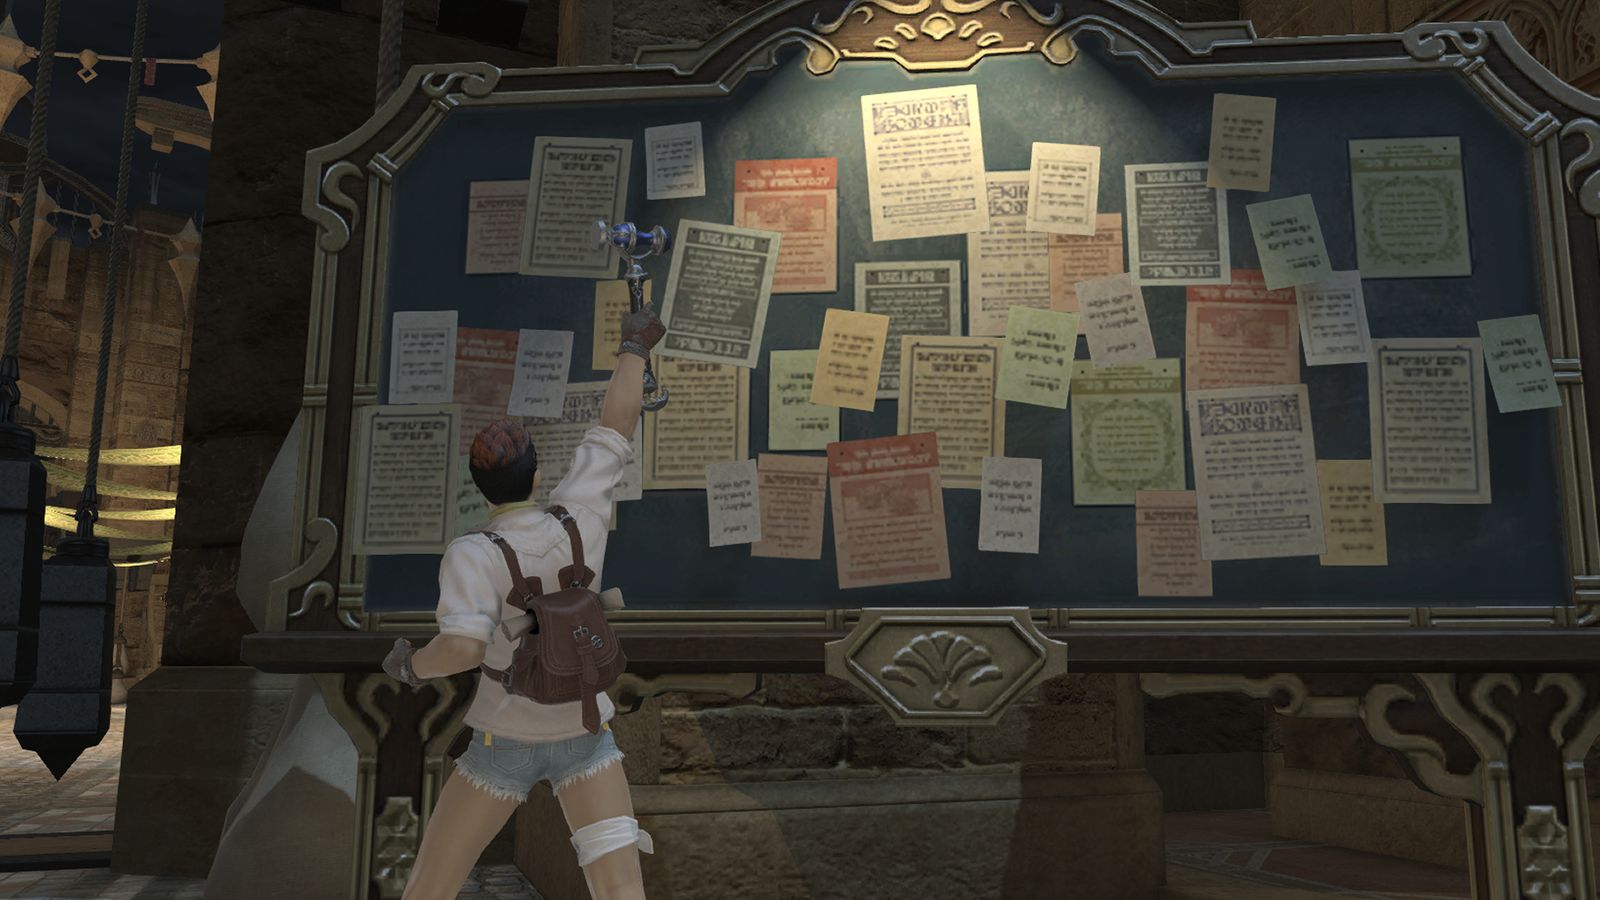 An image of a crafter from Final Fantasy XIV preparing to gather reagents for his Anima Lux Relic Weapon, from Heavensward. He is raising his hammer in the sky in front of a market board.